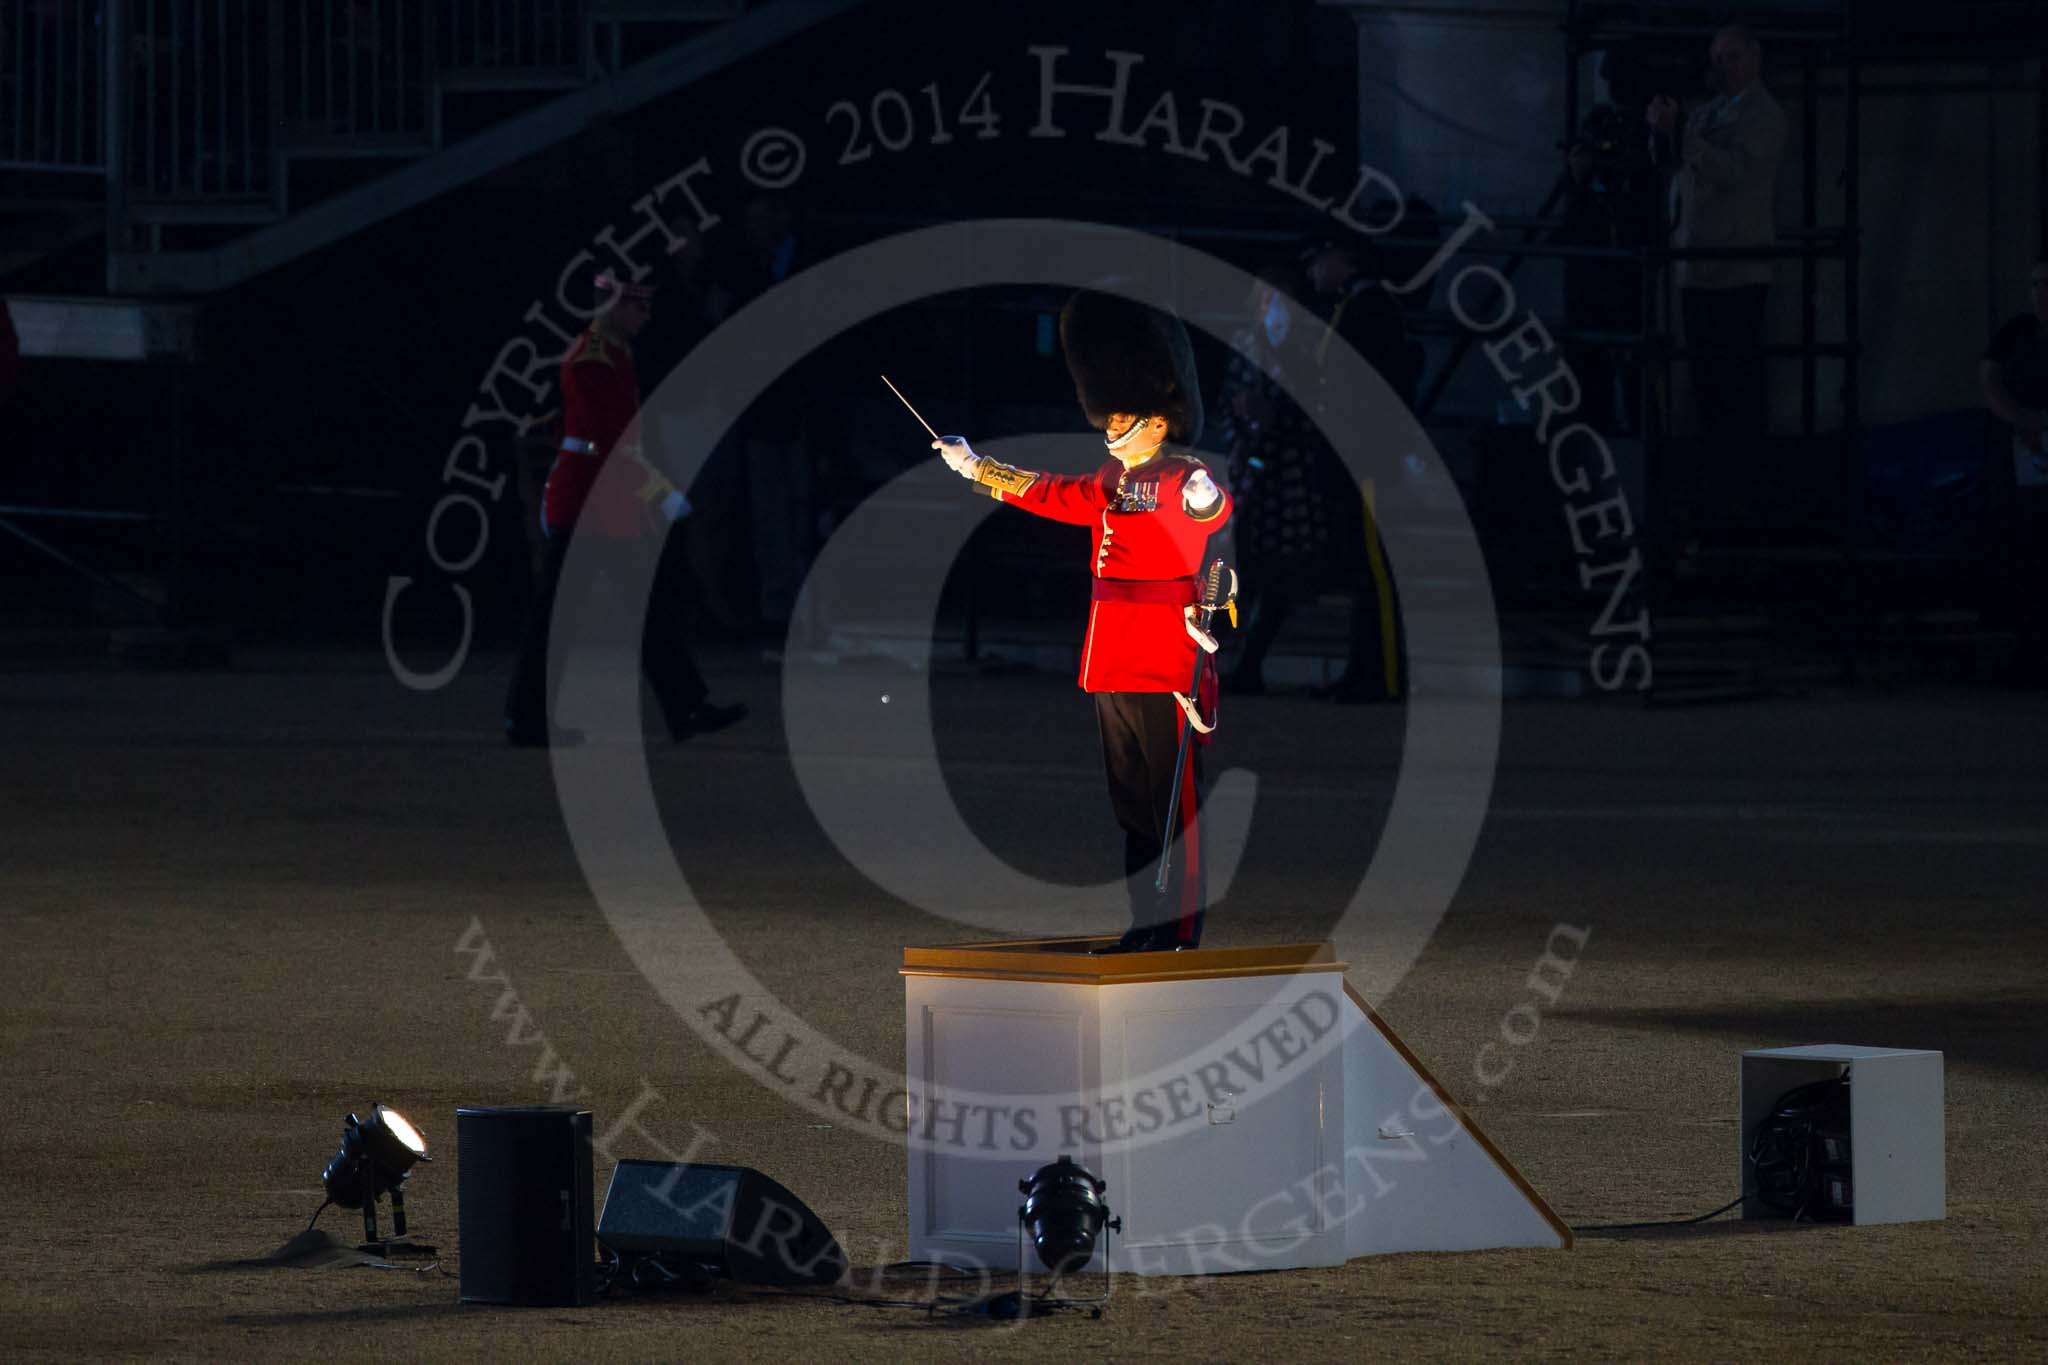 Beating Retreat 2014.
Horse Guards Parade, Westminster,
London SW1A,

United Kingdom,
on 11 June 2014 at 21:46, image #388